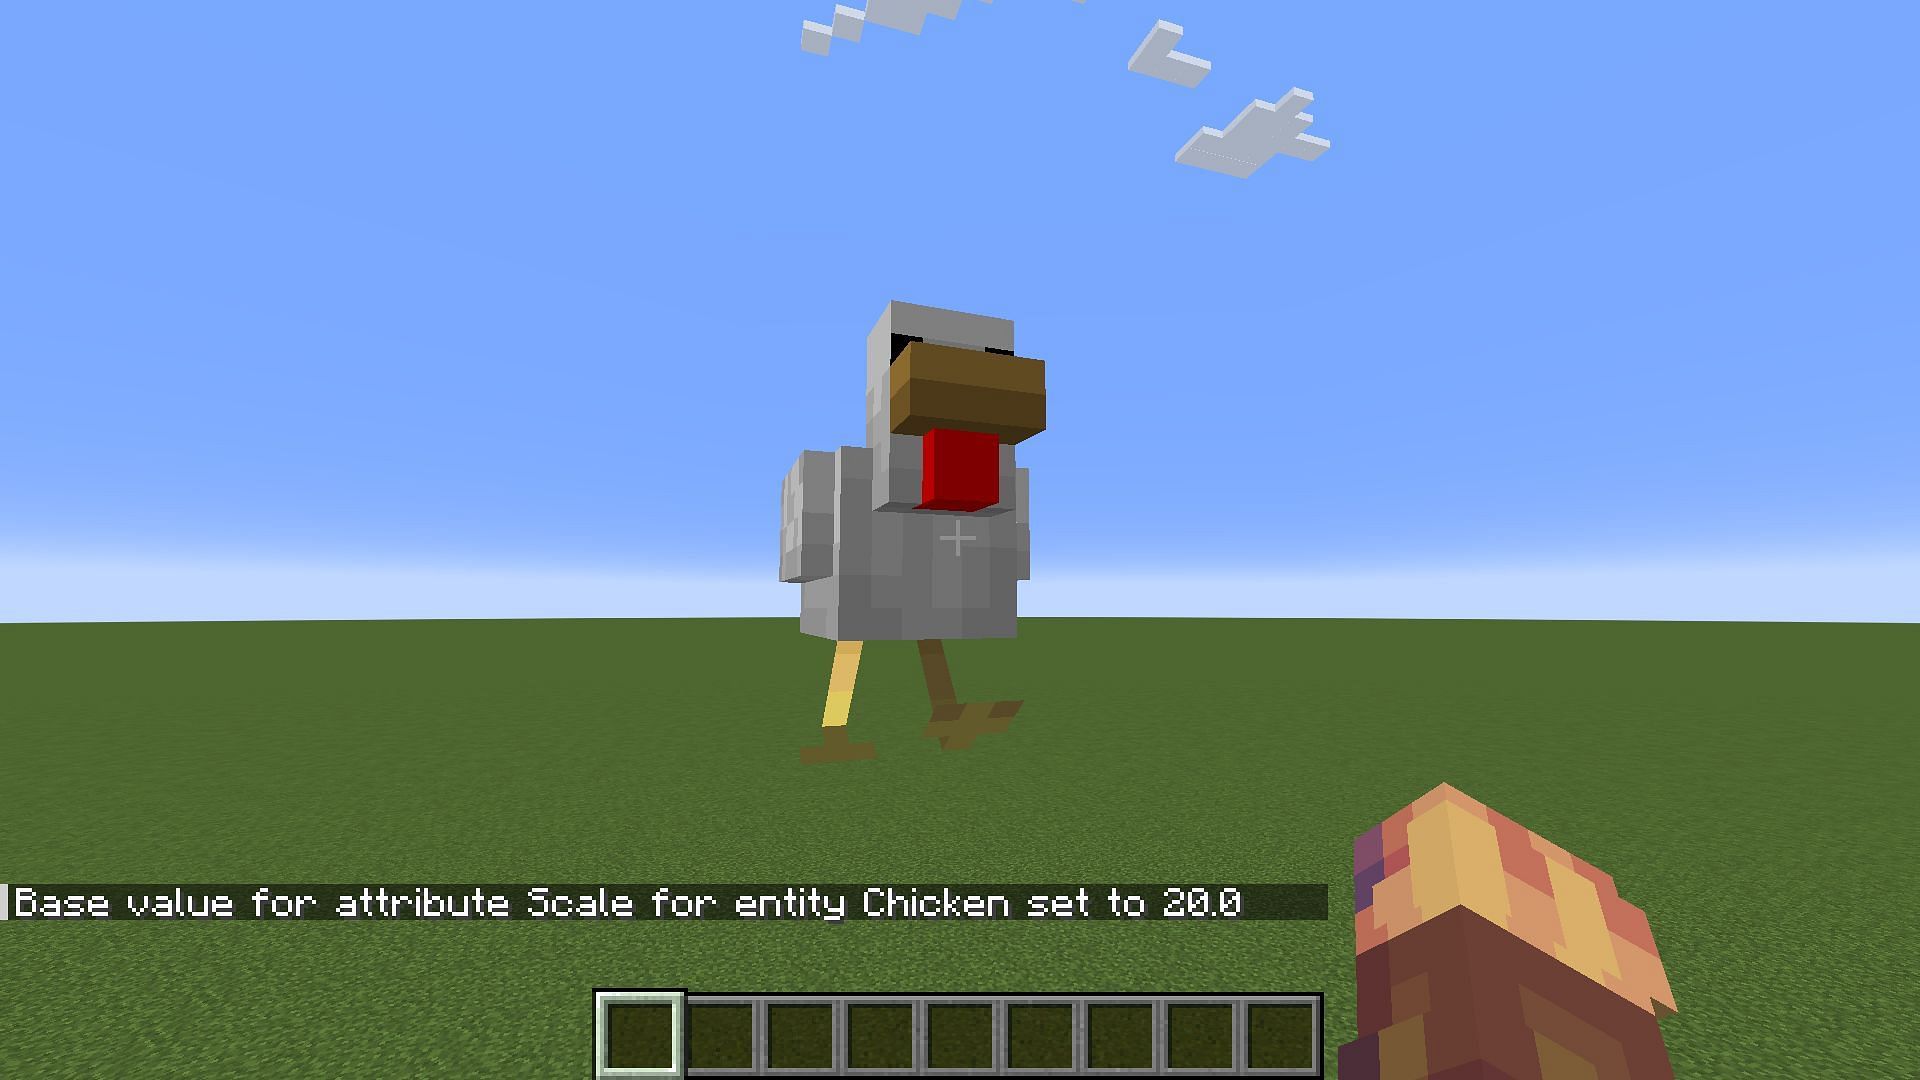 A new command is used to increase the size of a chicken in Minecraft.